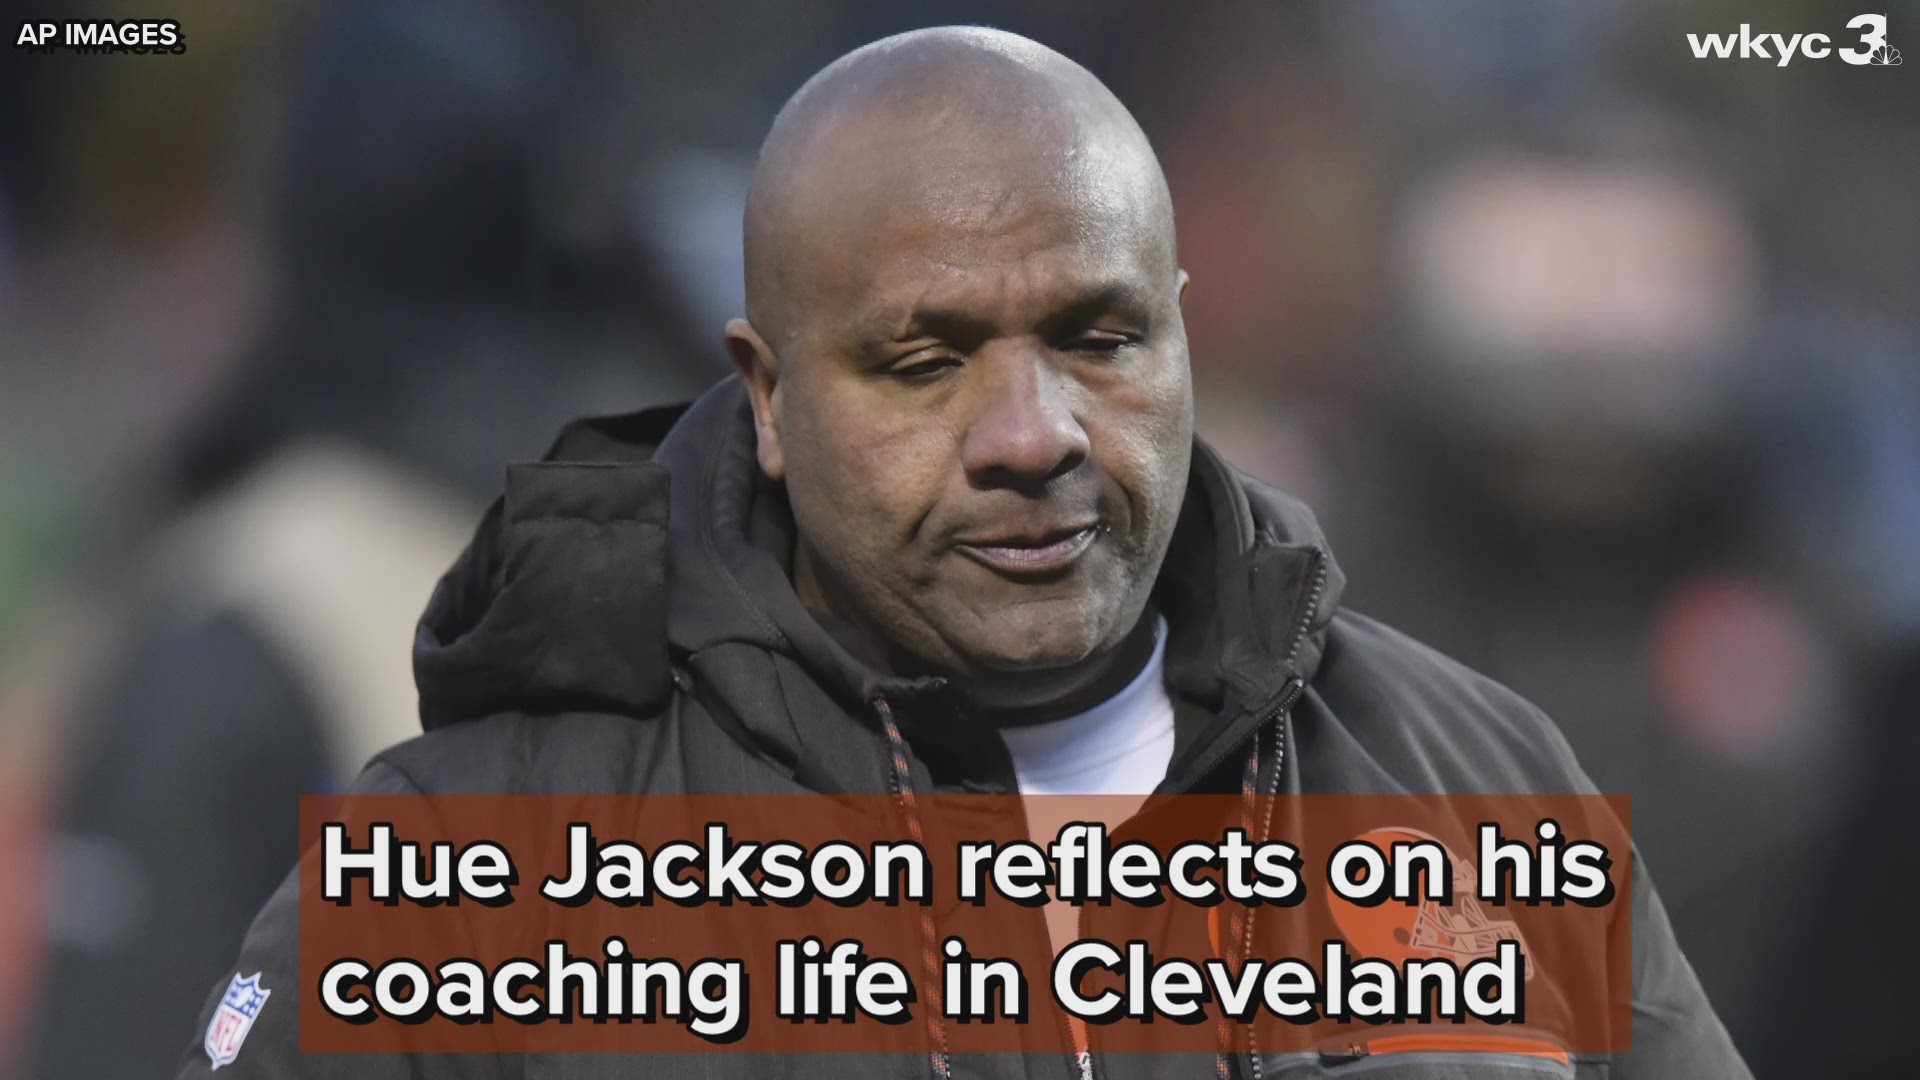 Hue unplugged!  In an interview with Sports Illustrated, Hue Jackson discussed the depression he experienced after being fired by the Cleveland Browns.